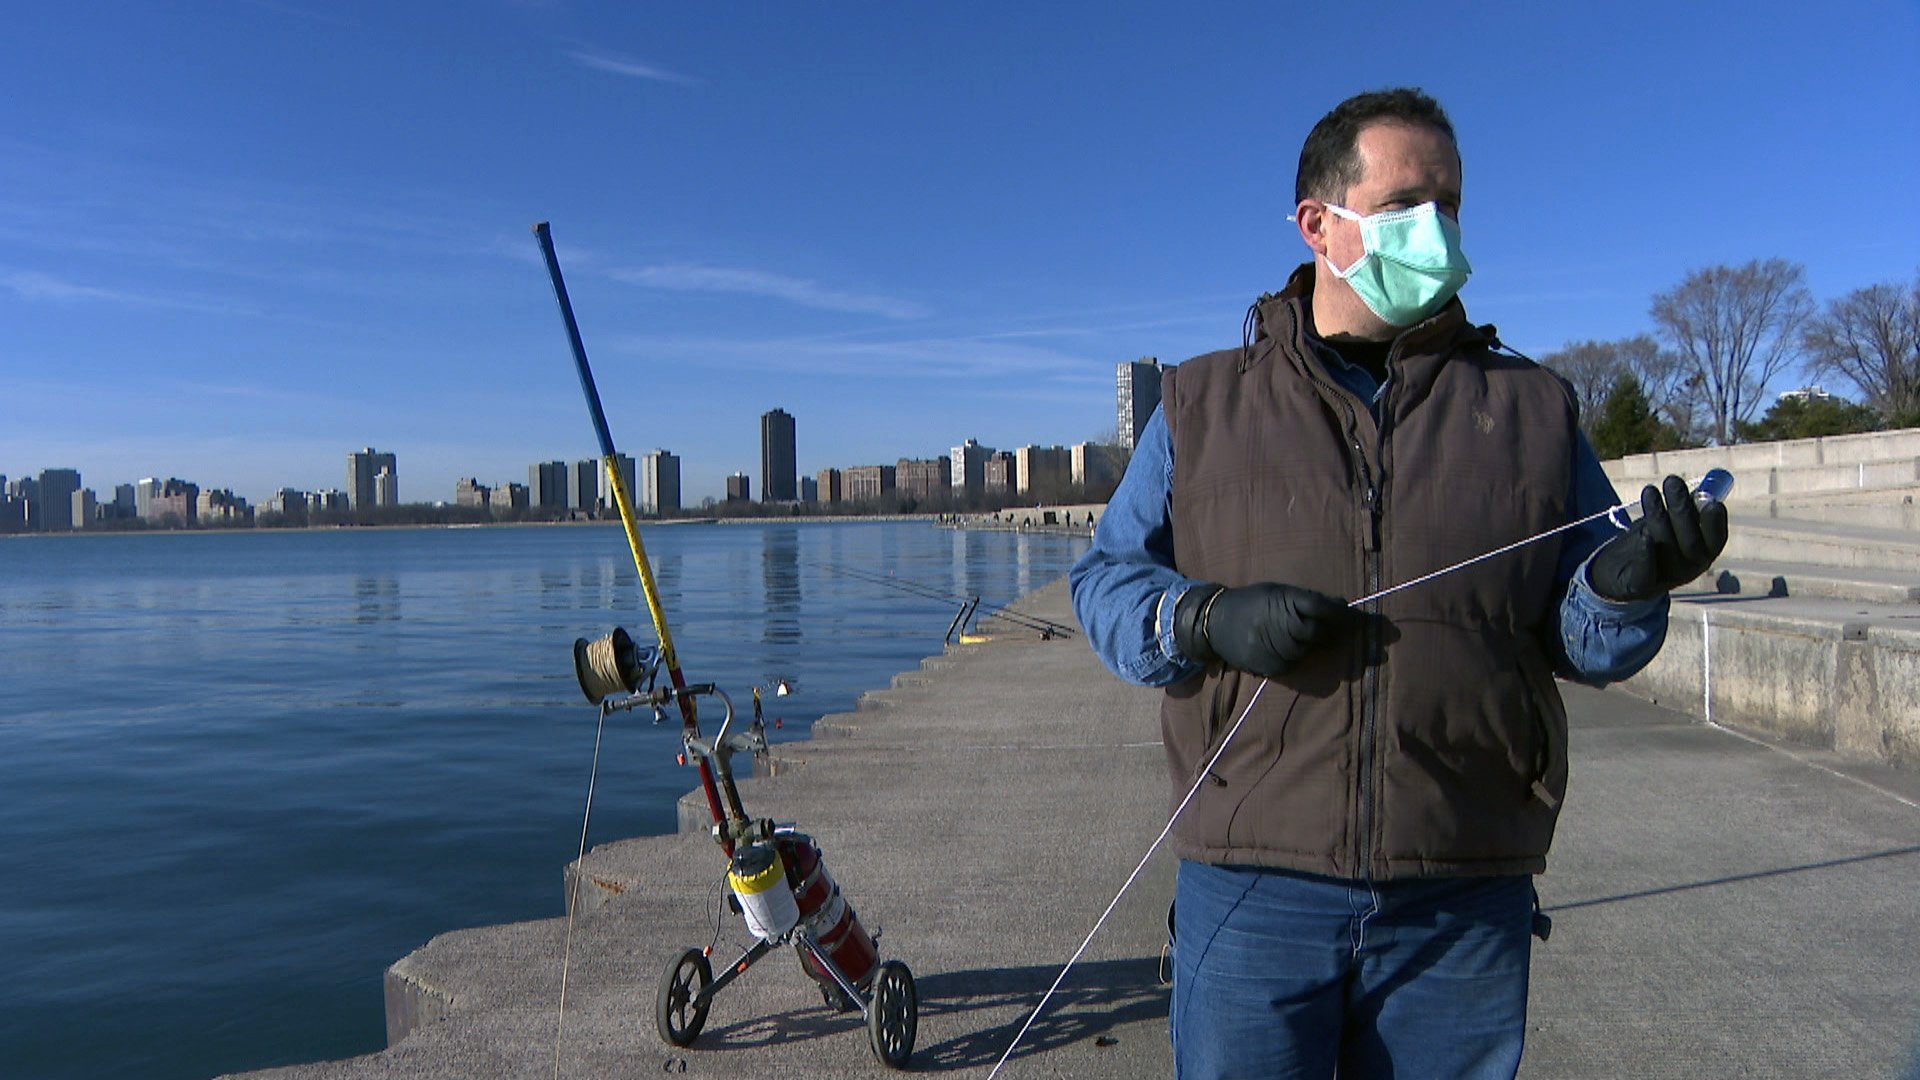 Fishing with a Fire Extinguisher? We Check Out Powerlining in